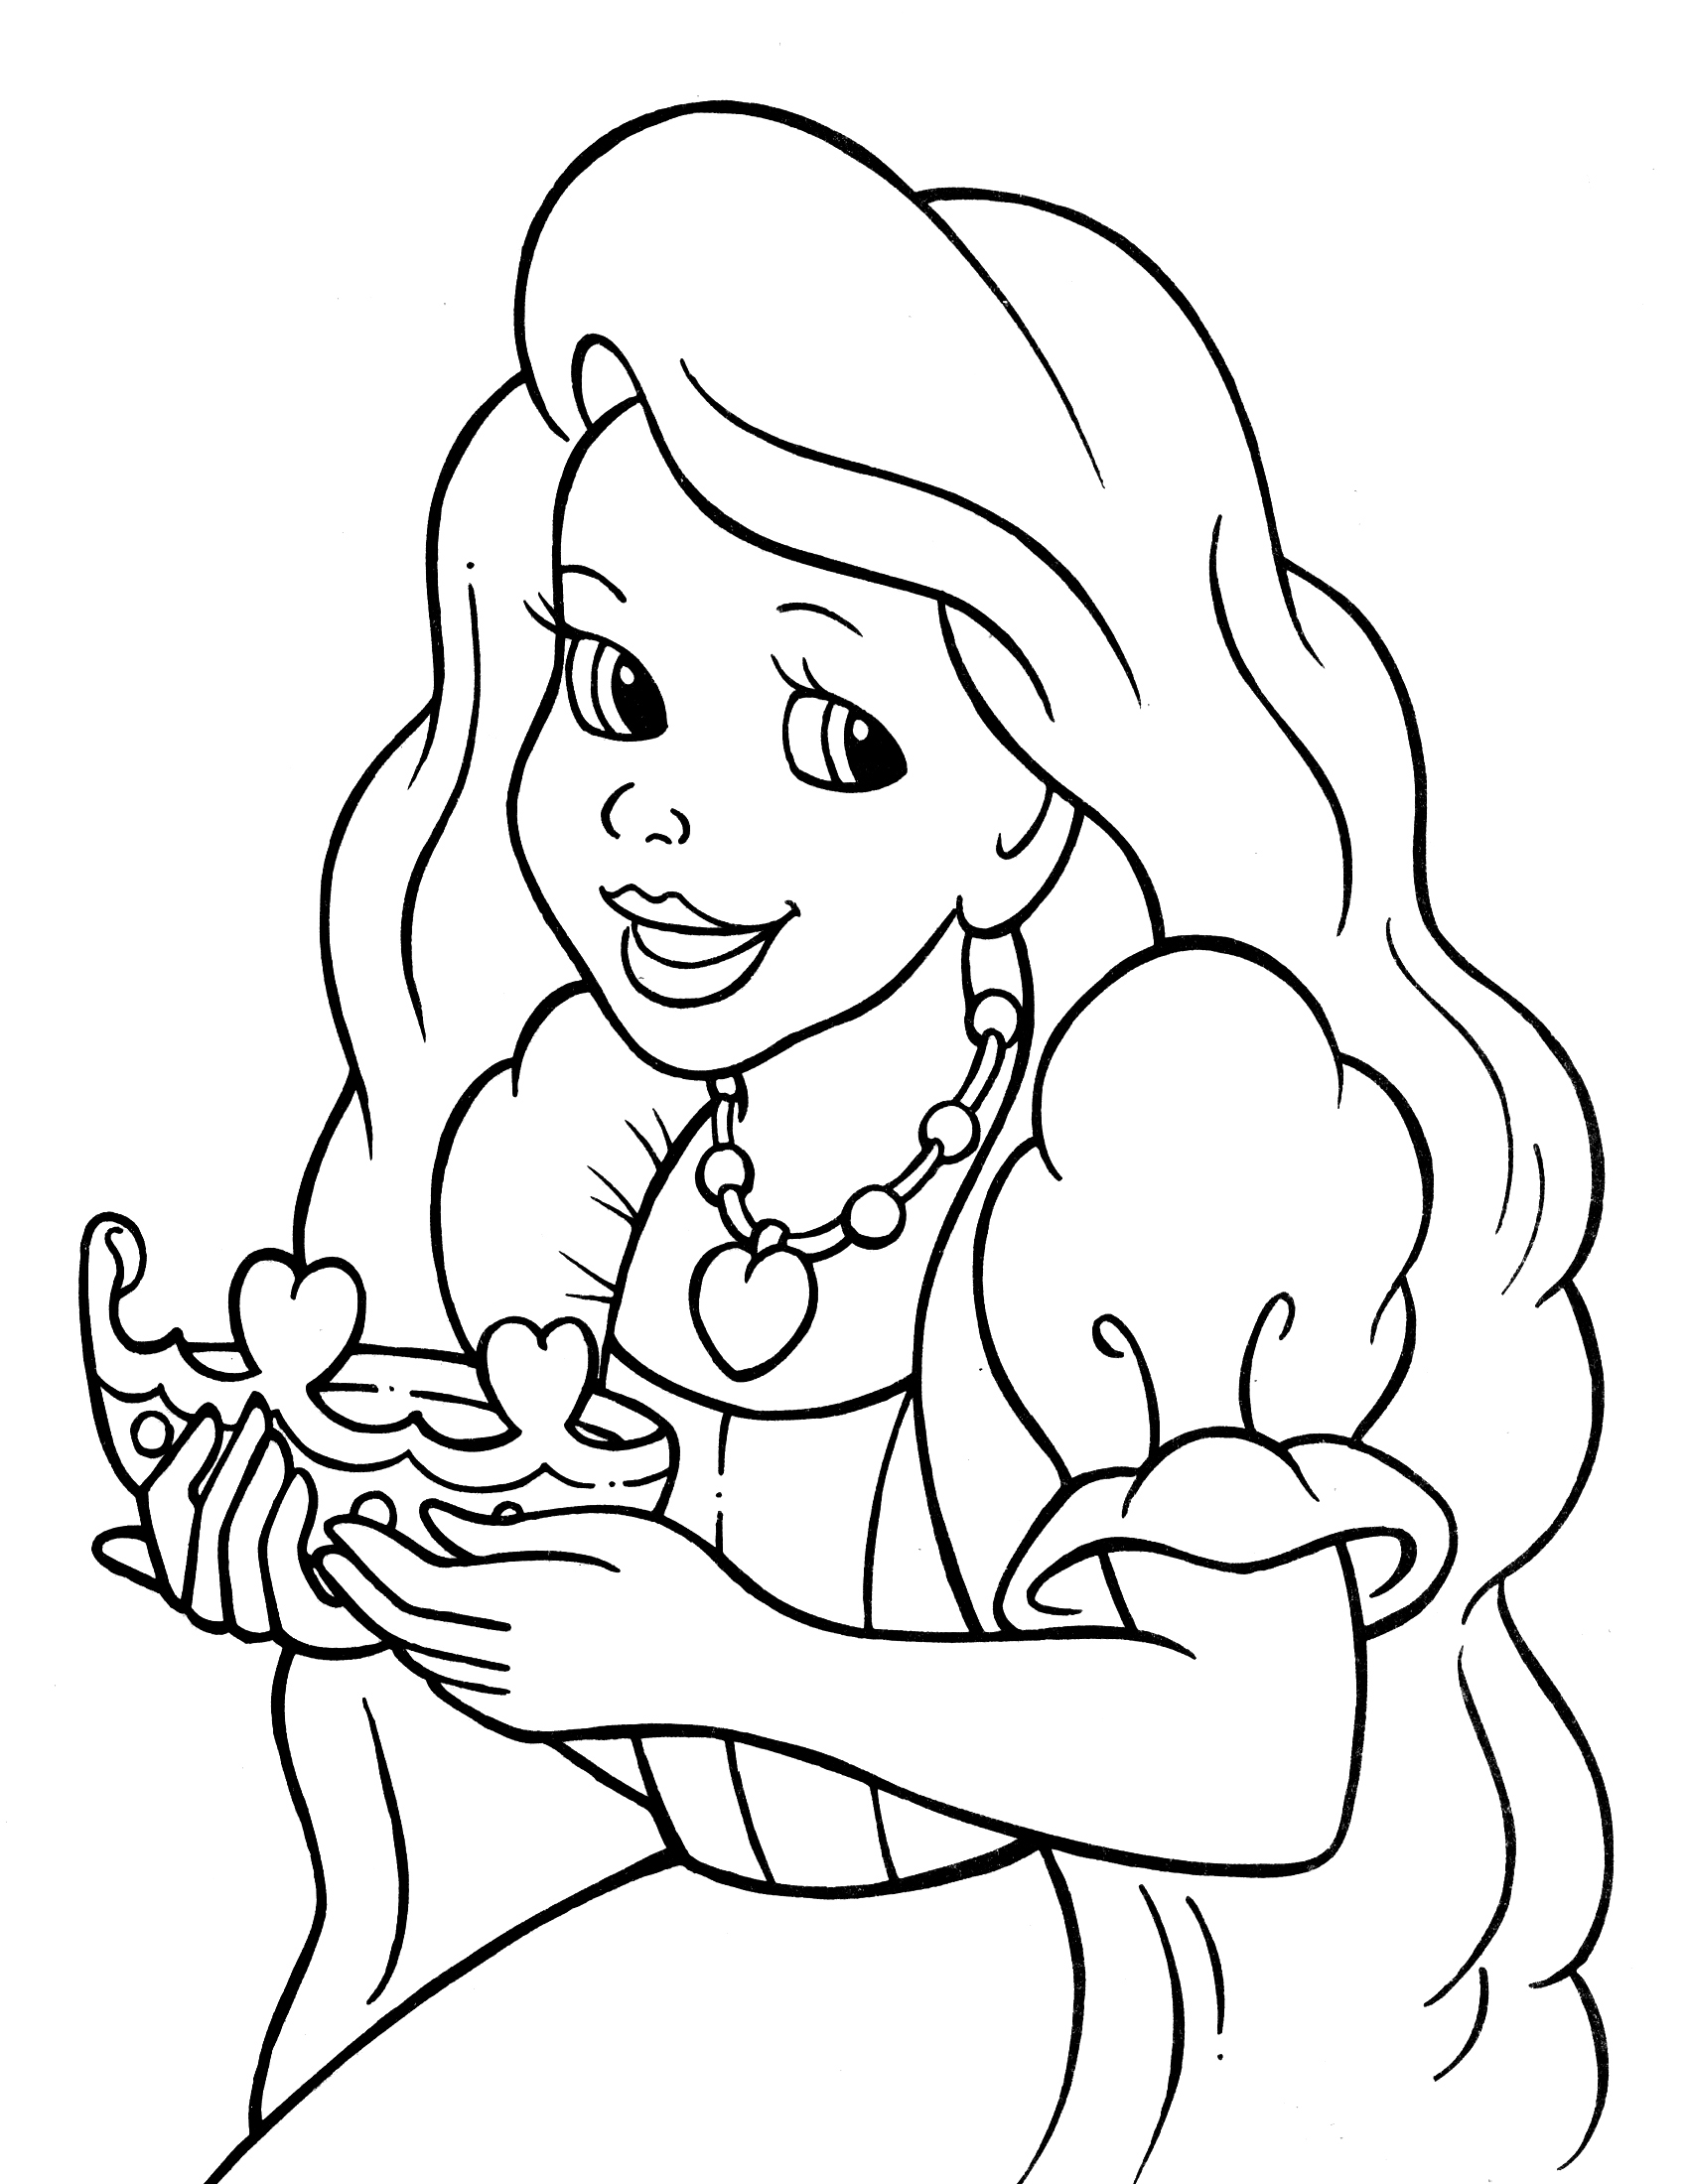 Crayola Adult Coloring Pages At GetDrawings Free Download